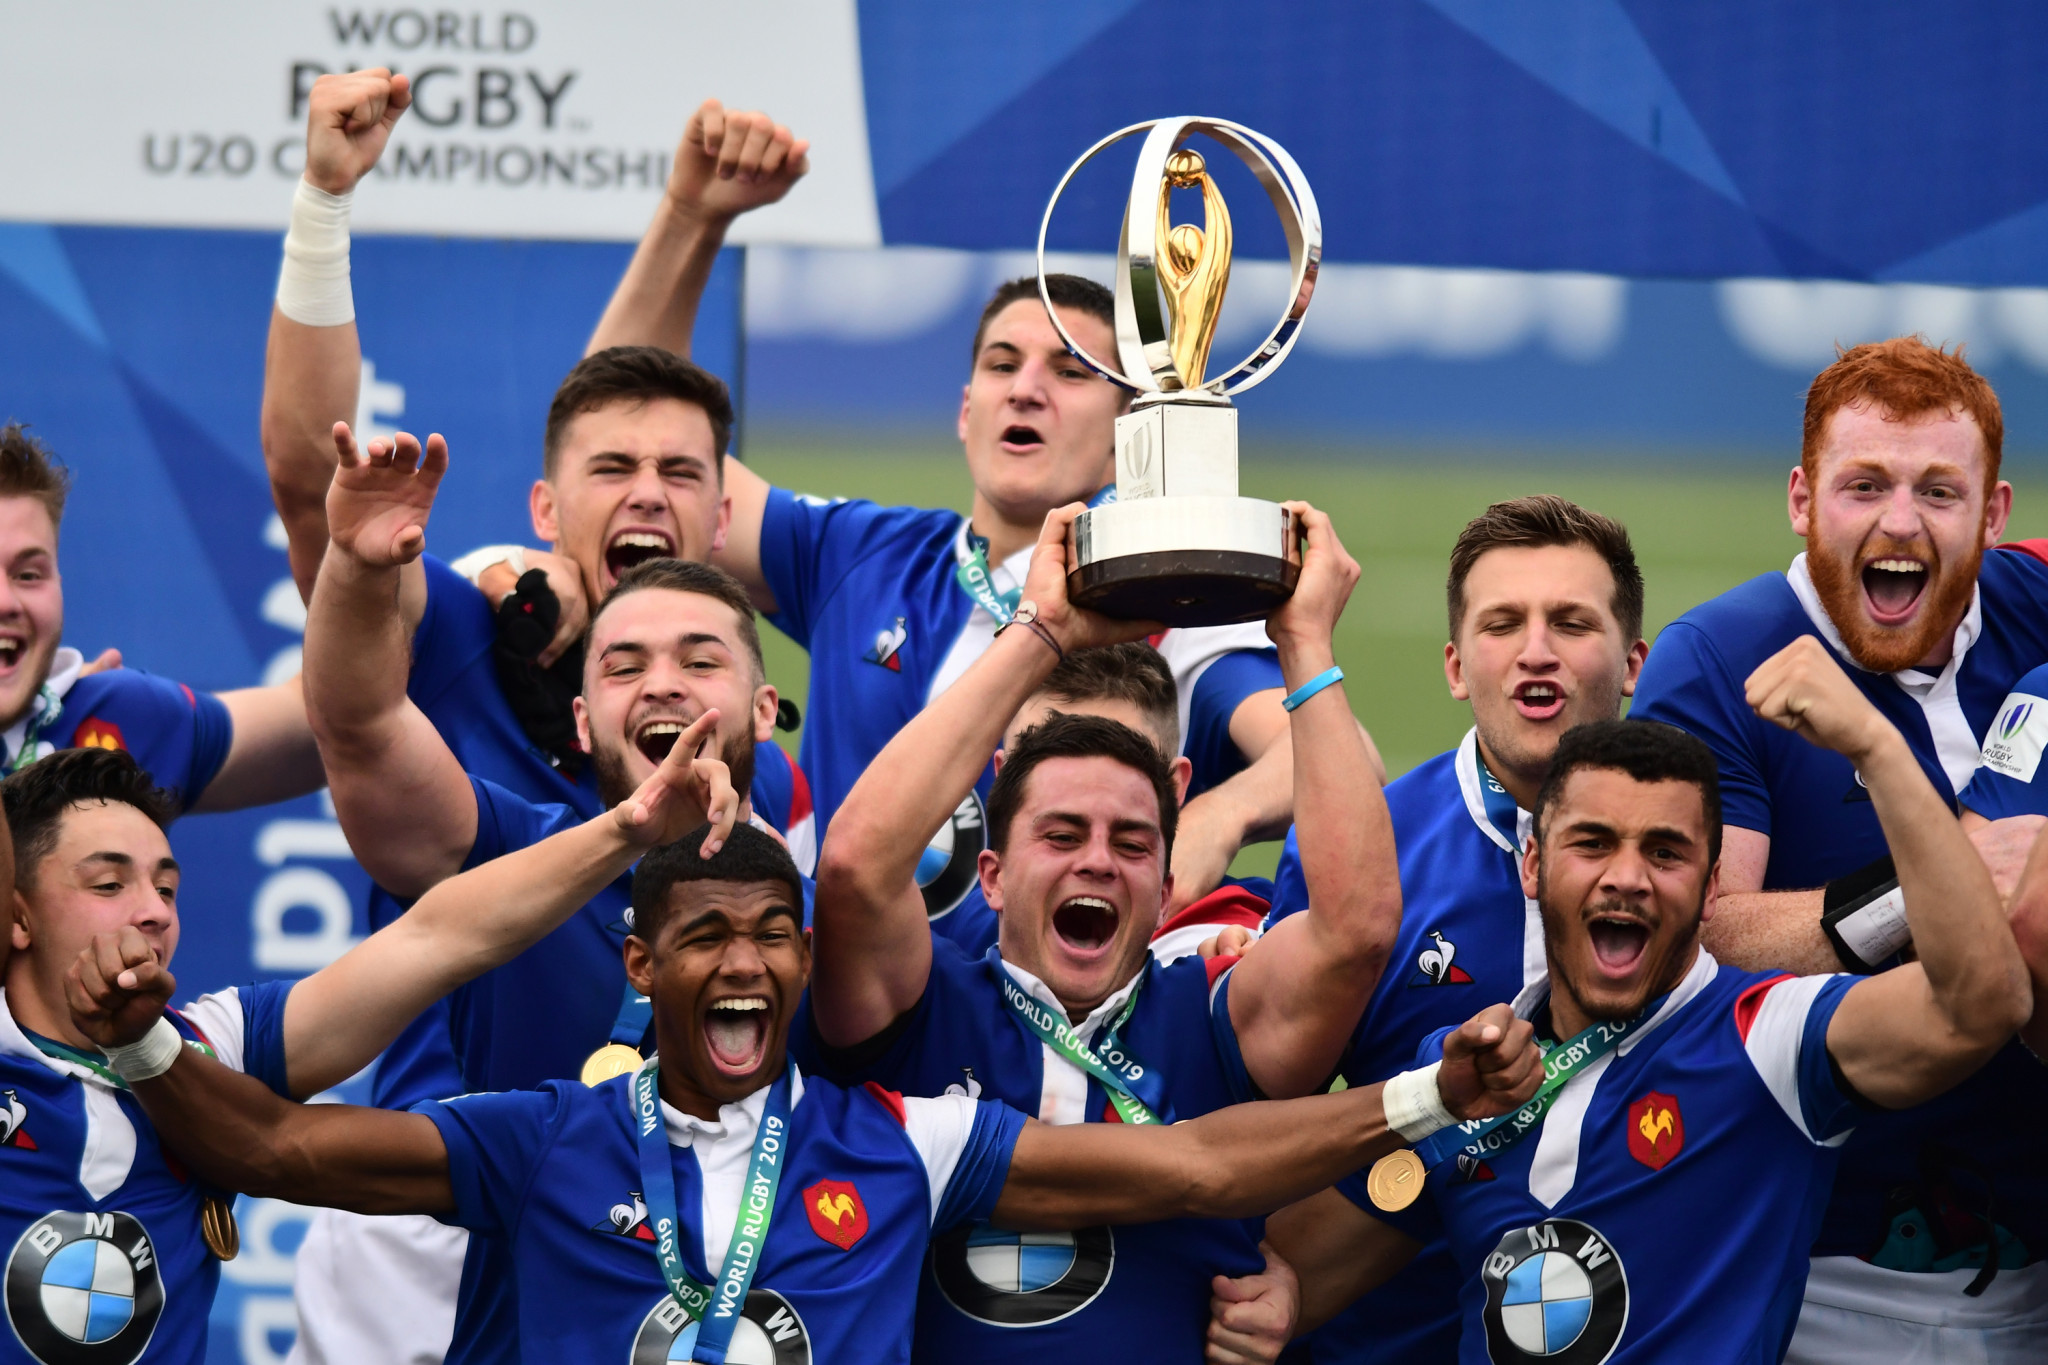 England and South Africa to lock horns again, at World Rugby U20 Championship